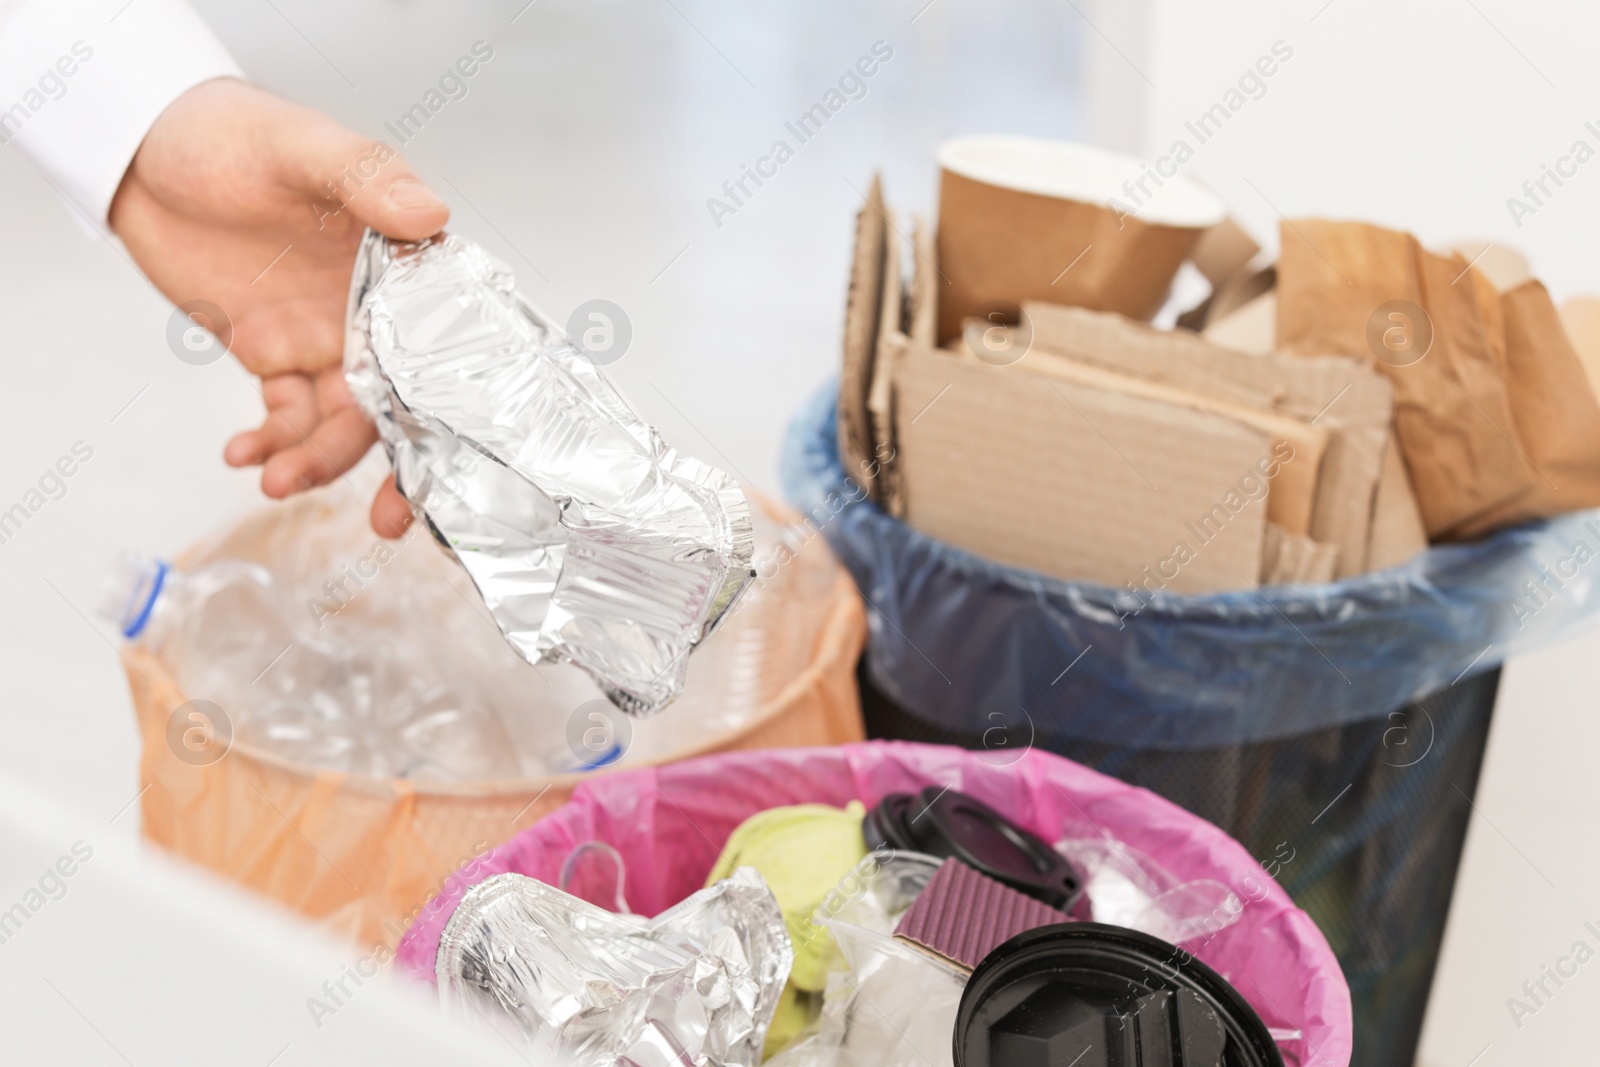 Photo of Man putting used foil container into trash bin, closeup. Waste recycling